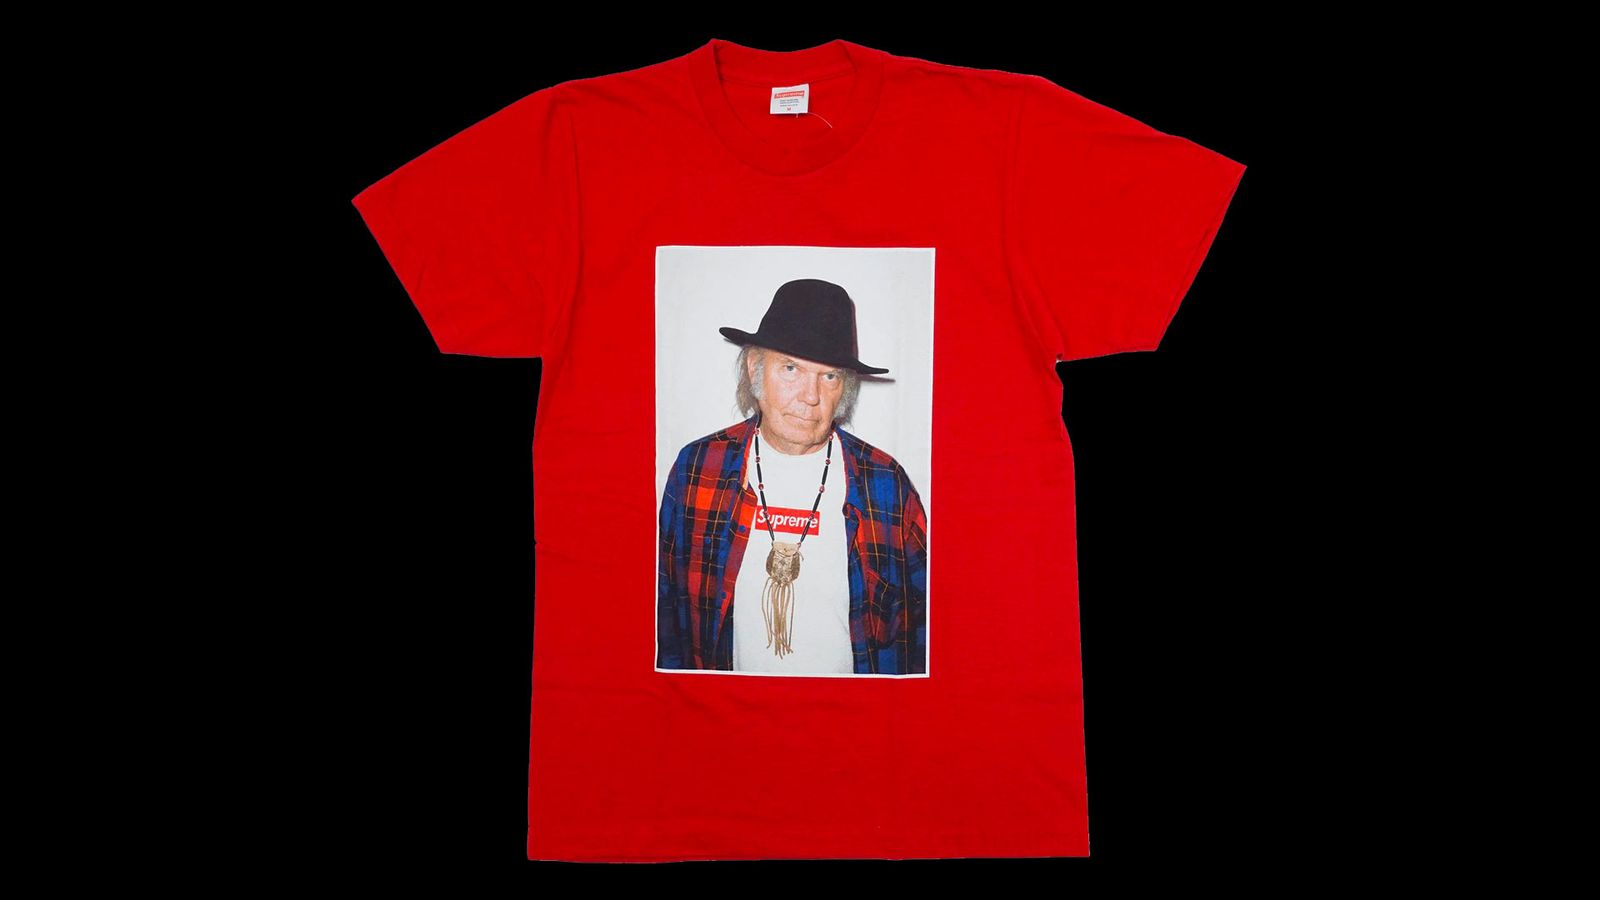 Supreme Neil Young Tee product image of a red t-shirt with Neil Young pictured in the centre wearing a white box logo tee and a black hat.